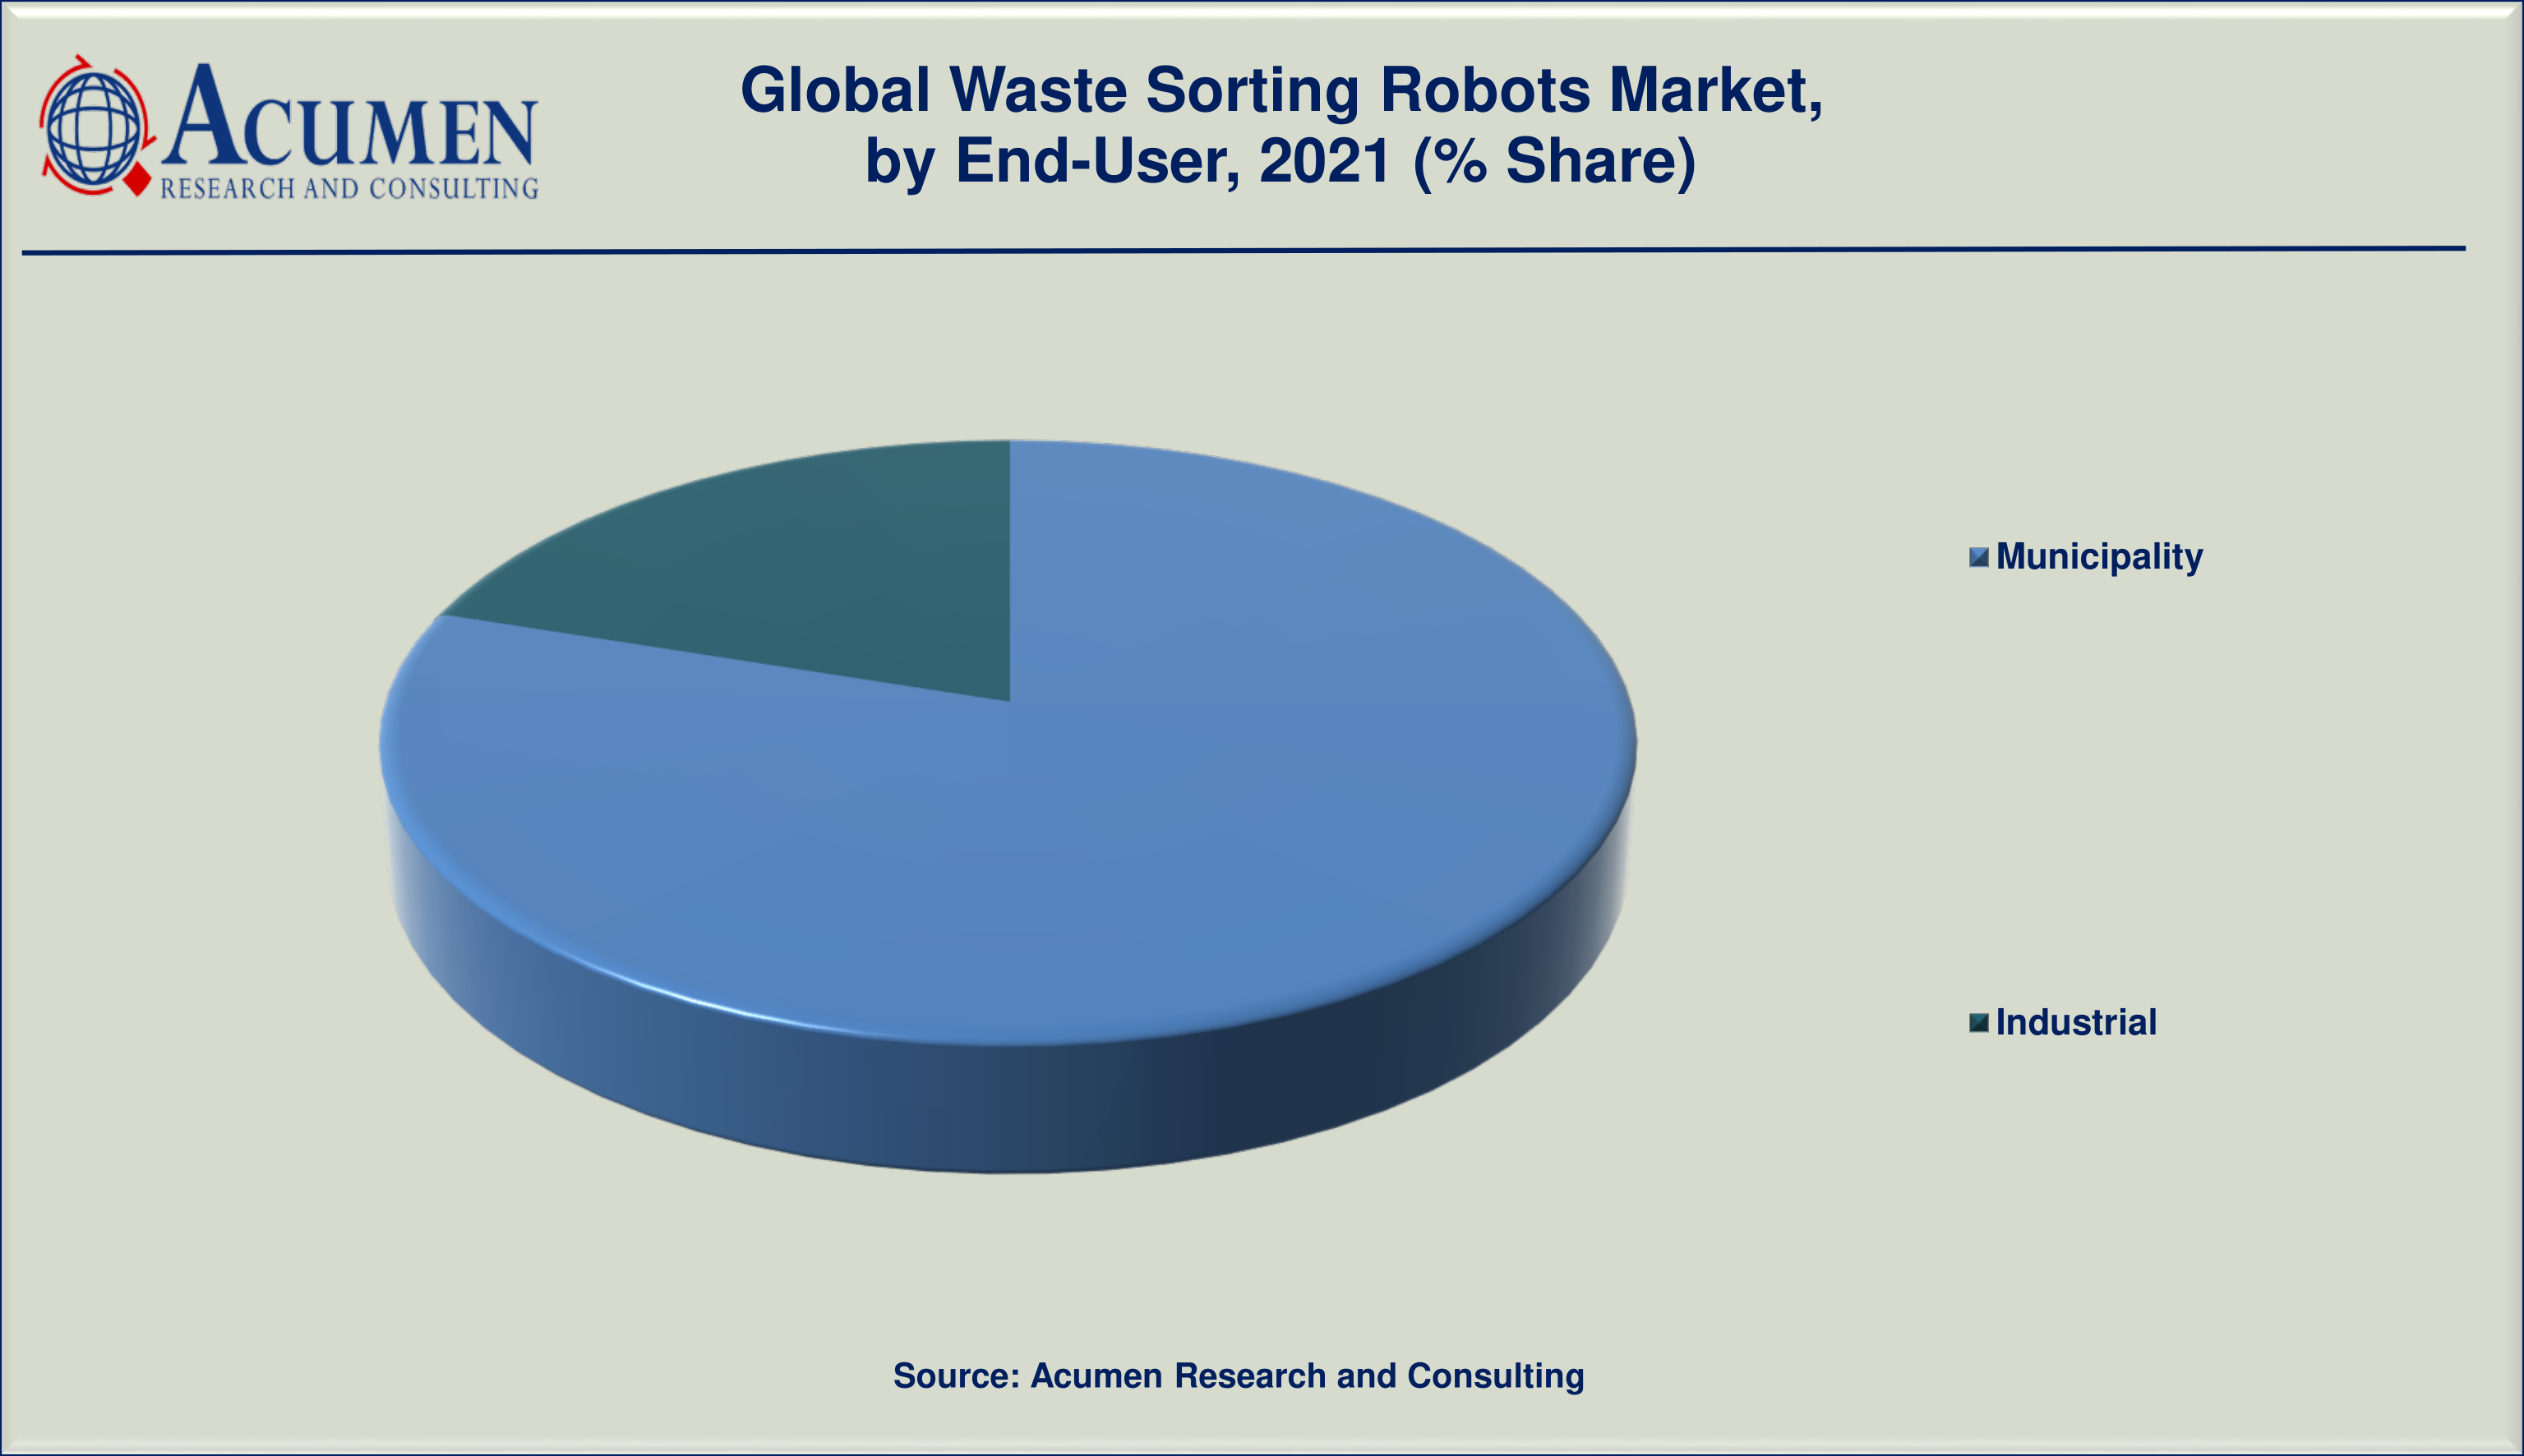 Waste Sorting Robots Market By End-User is projected to achieve a market size of USD 10,286 Million by 2030 budding at a CAGR of 19.1%